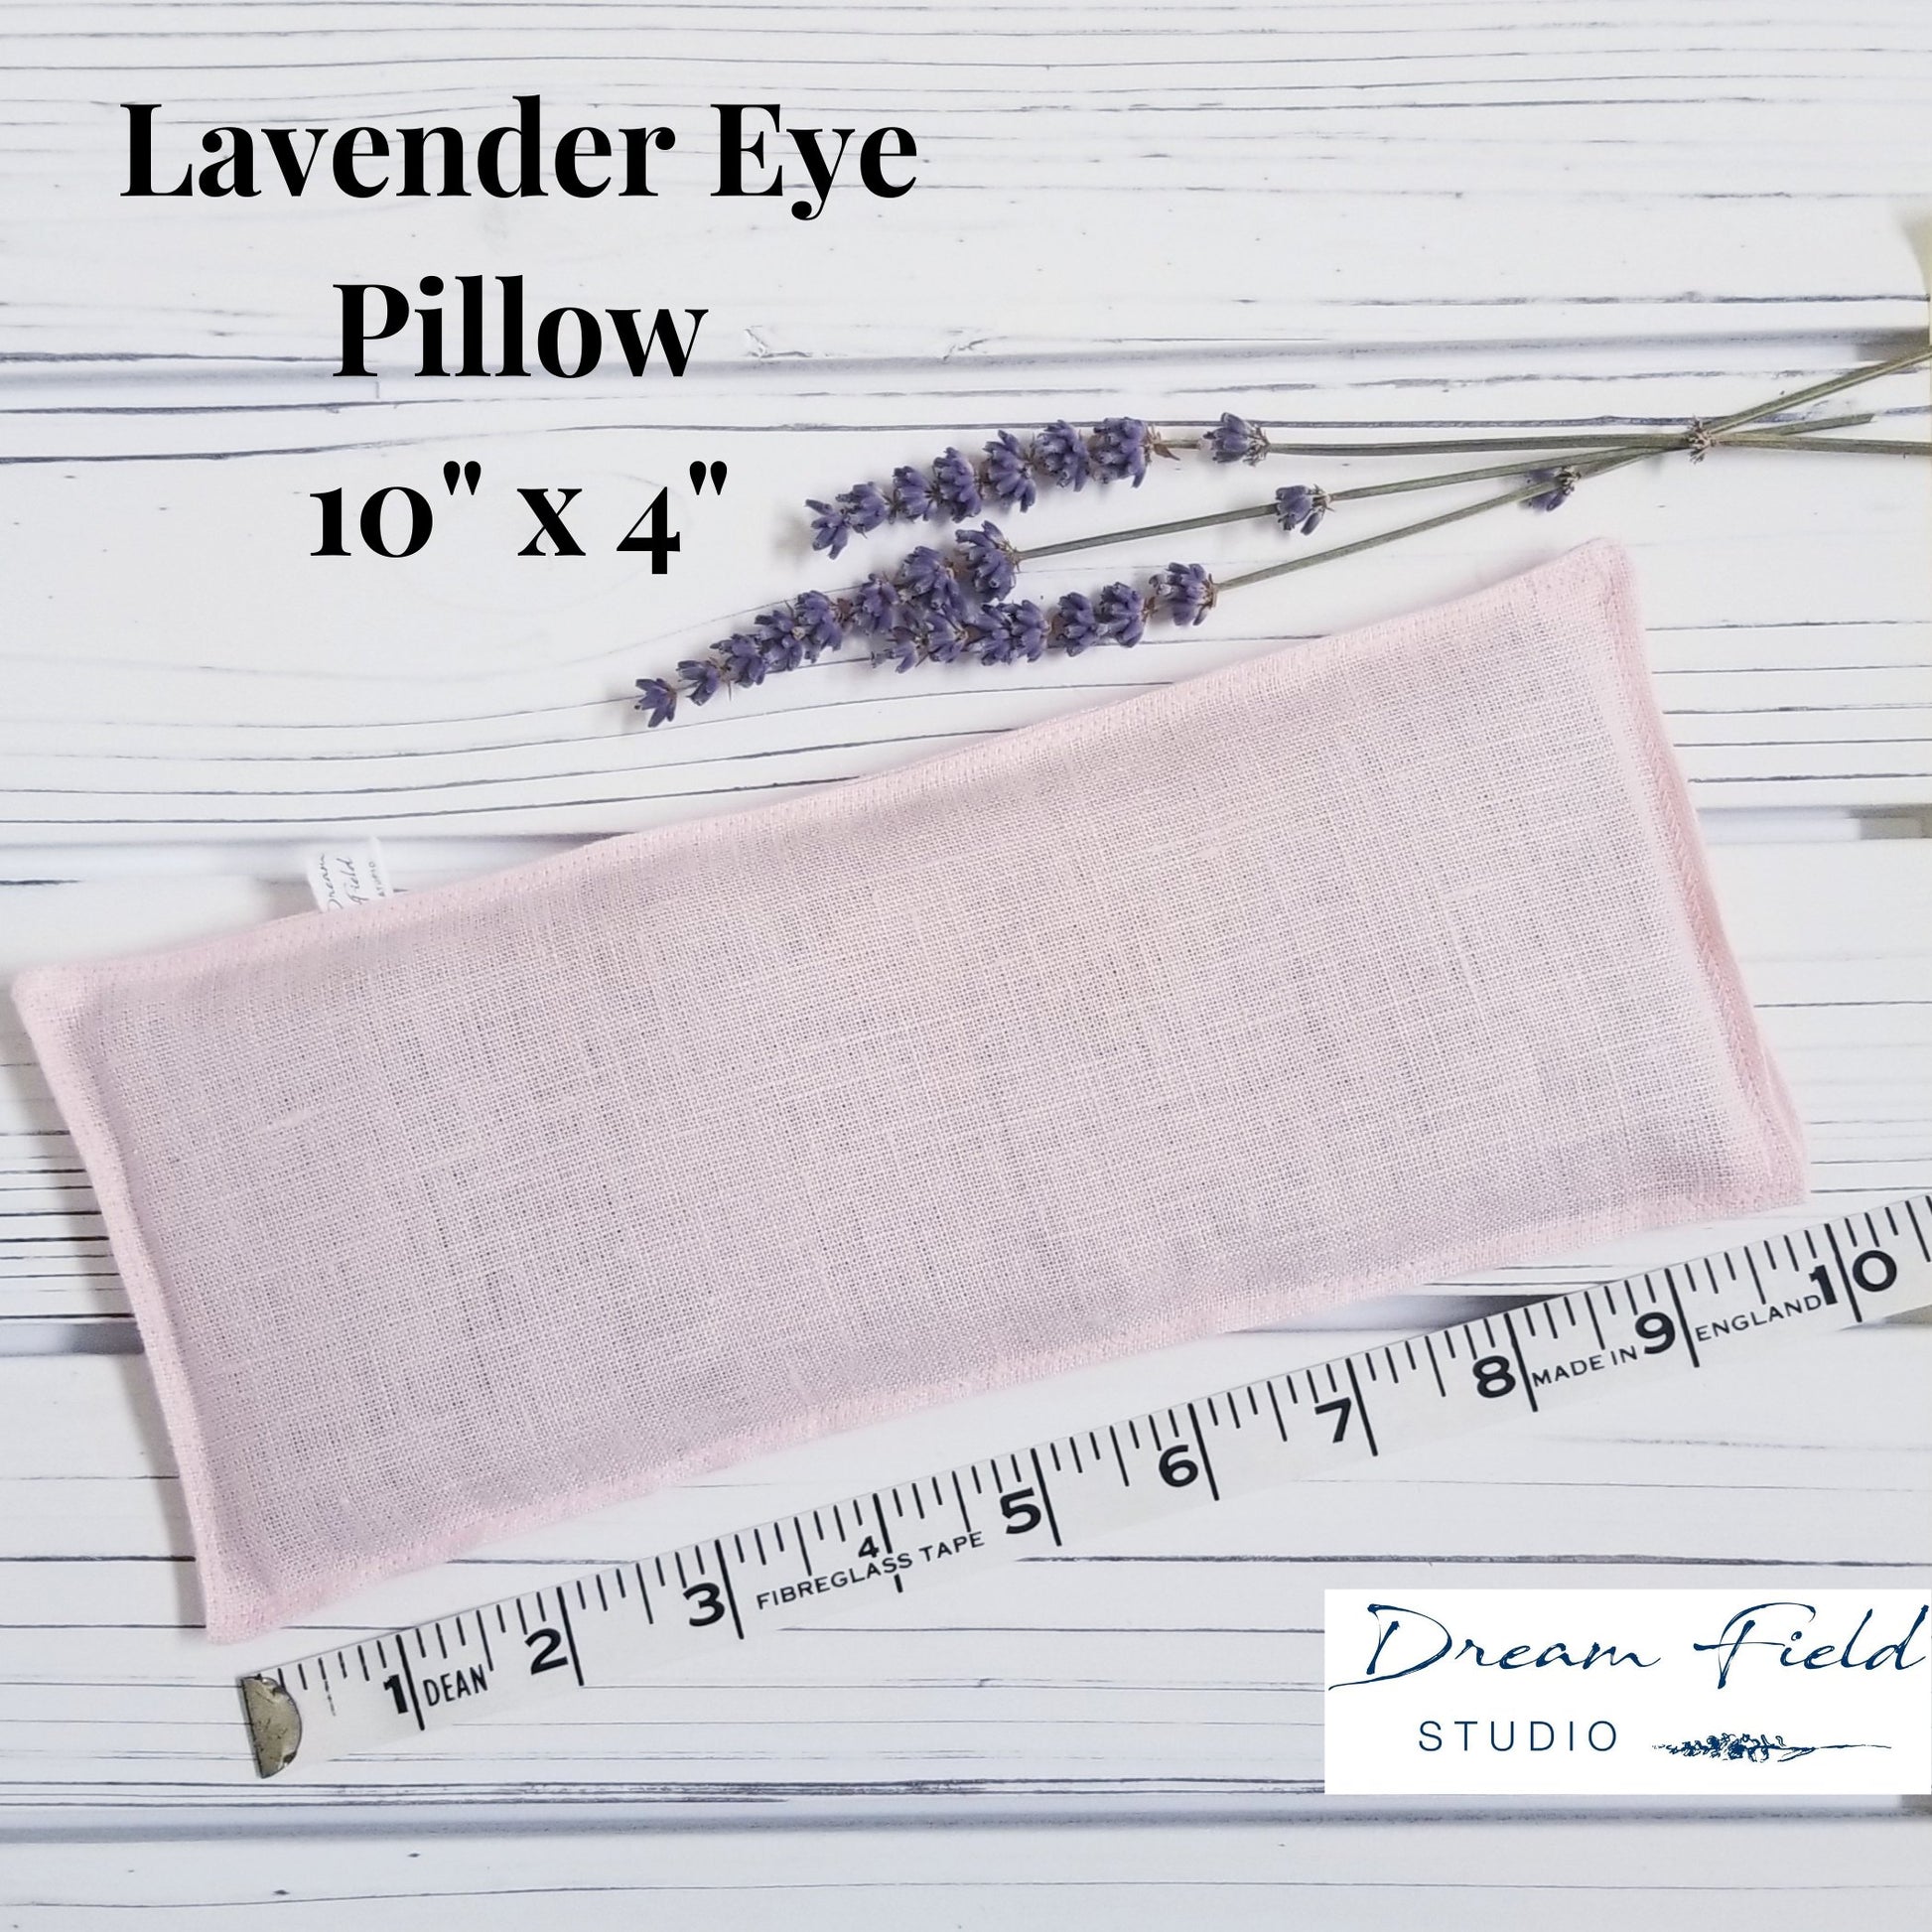 Lavender Eye PIllow 10" x 4" Size Specificaitons